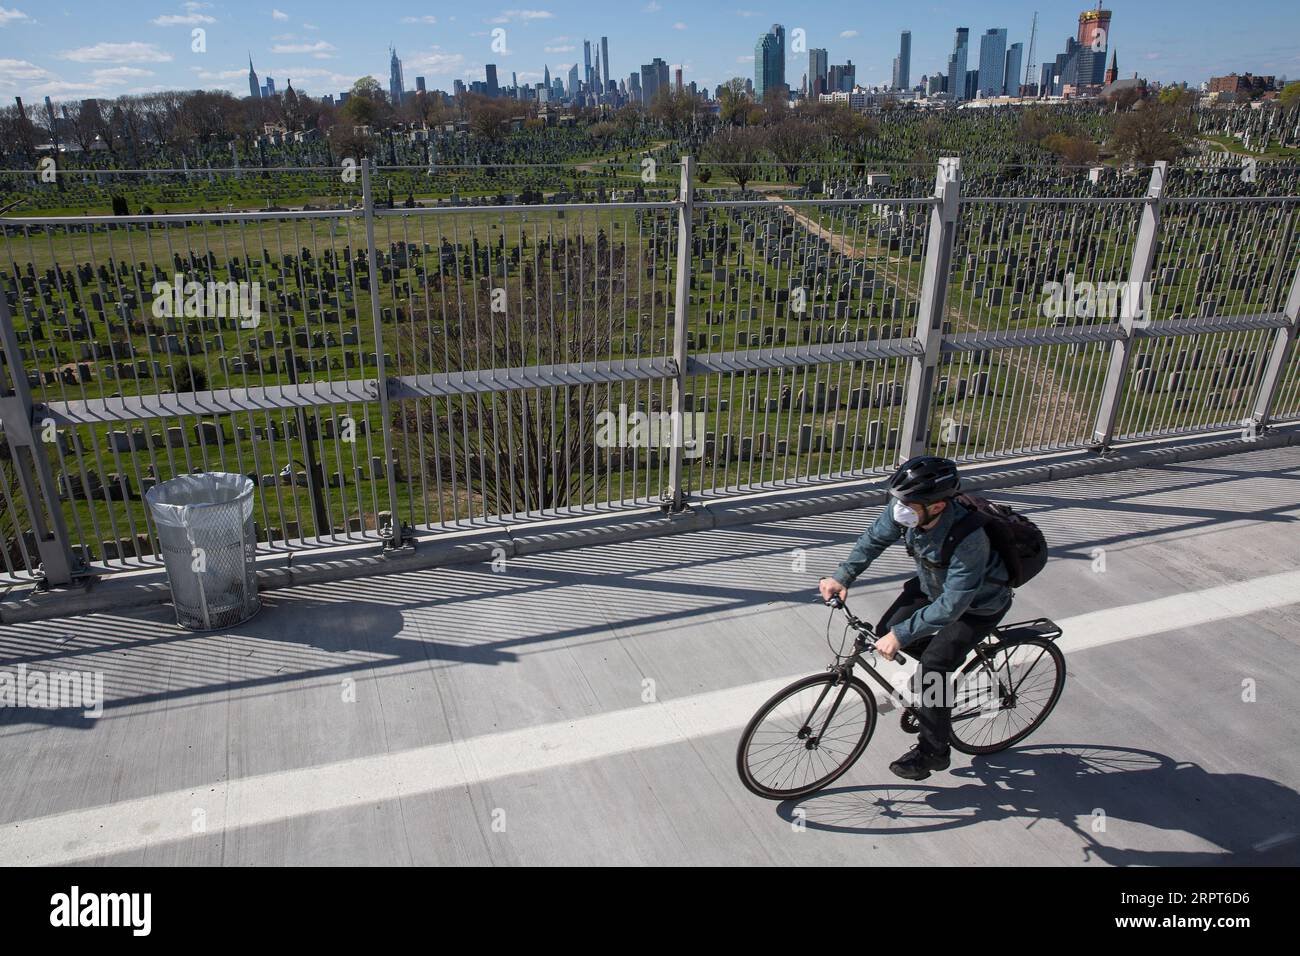 200411 -- NEW YORK, April 11, 2020 Xinhua -- A man rides a bike past the Calvary Cemetery, which is closed to visitors due to the coronavirus pandemic, in Queens of New York, the United States, April 11, 2020. The total number of deaths due to COVID-19 in the United States topped 20,000 Saturday afternoon, according to data compiled by the Center for Systems Science and Engineering CSSE at Johns Hopkins University. Photo by Michael Nagle/Xinhua U.S.-NEW YORK-COVID-19-DEATH TOLL PUBLICATIONxNOTxINxCHN Stock Photo